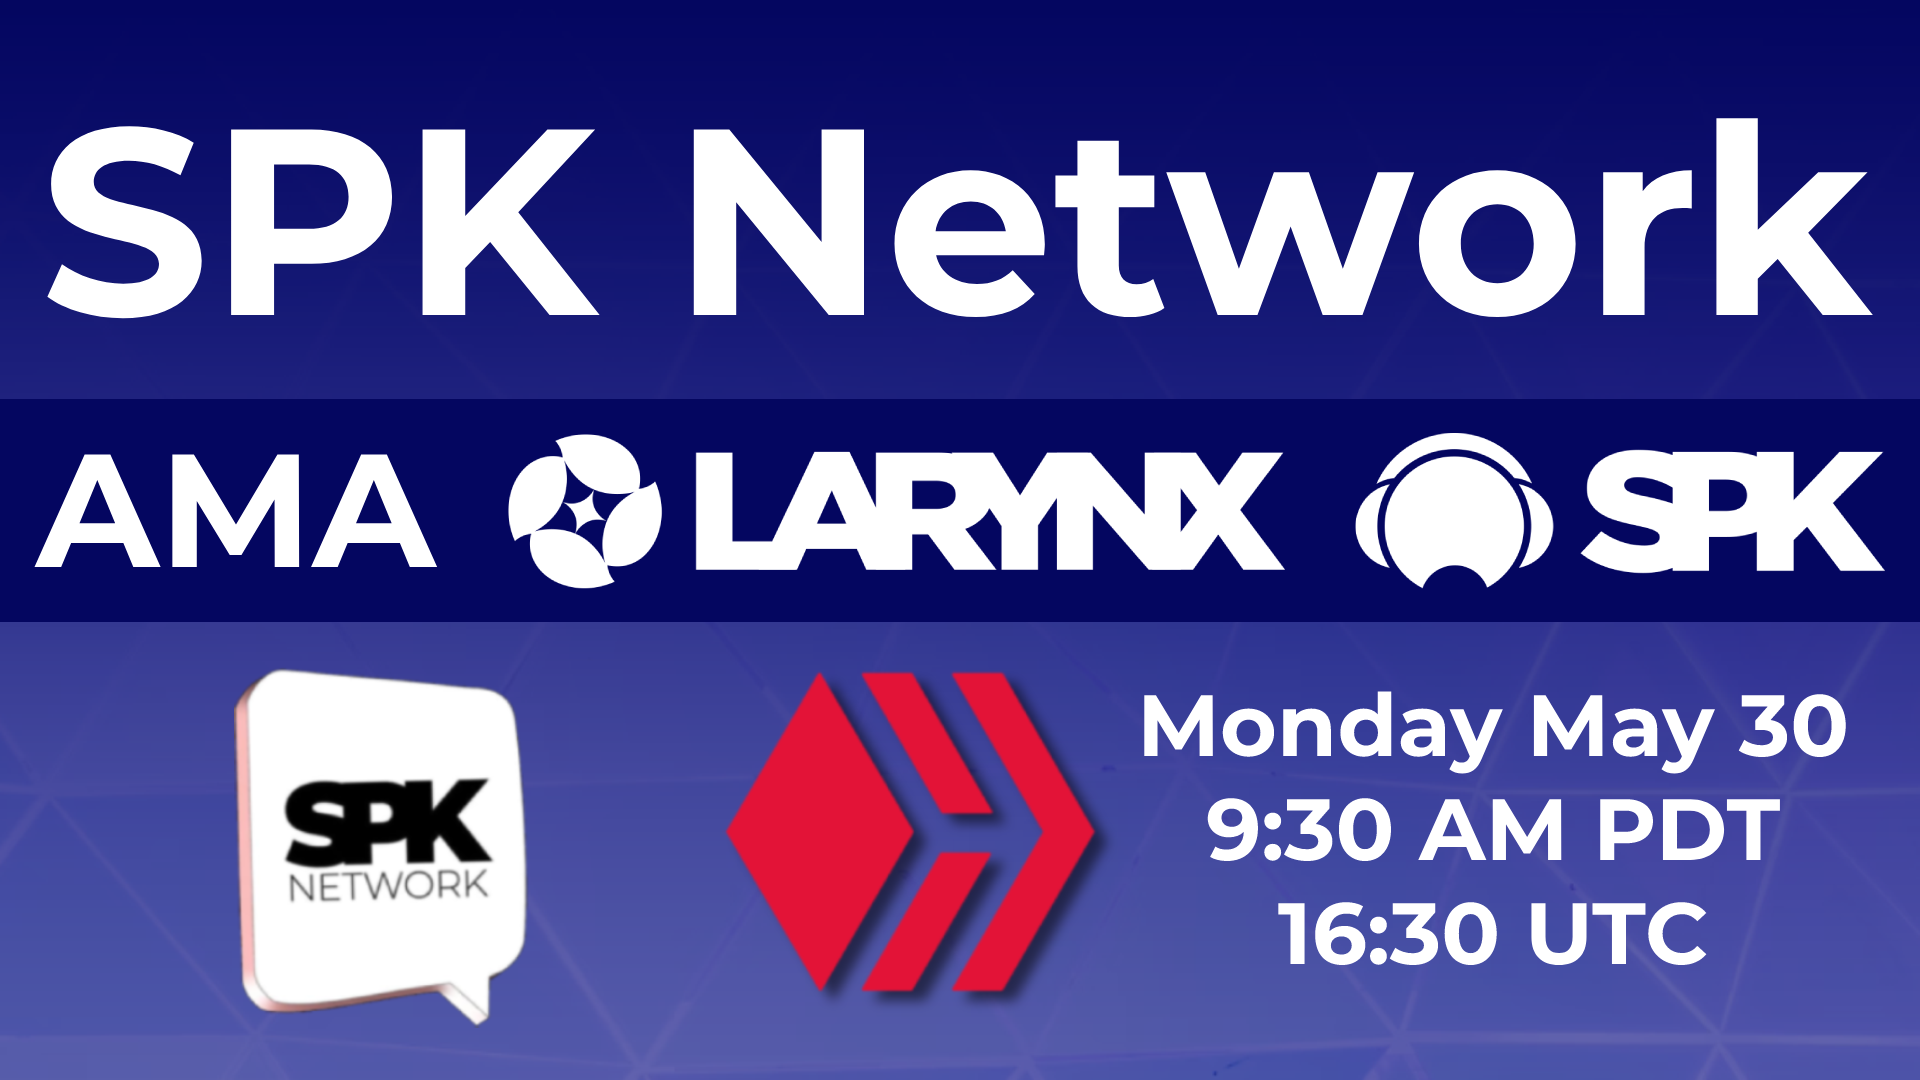 @spknetwork/spk-network-ama-or-larynx-miner-tokens-and-and-spk-tokens